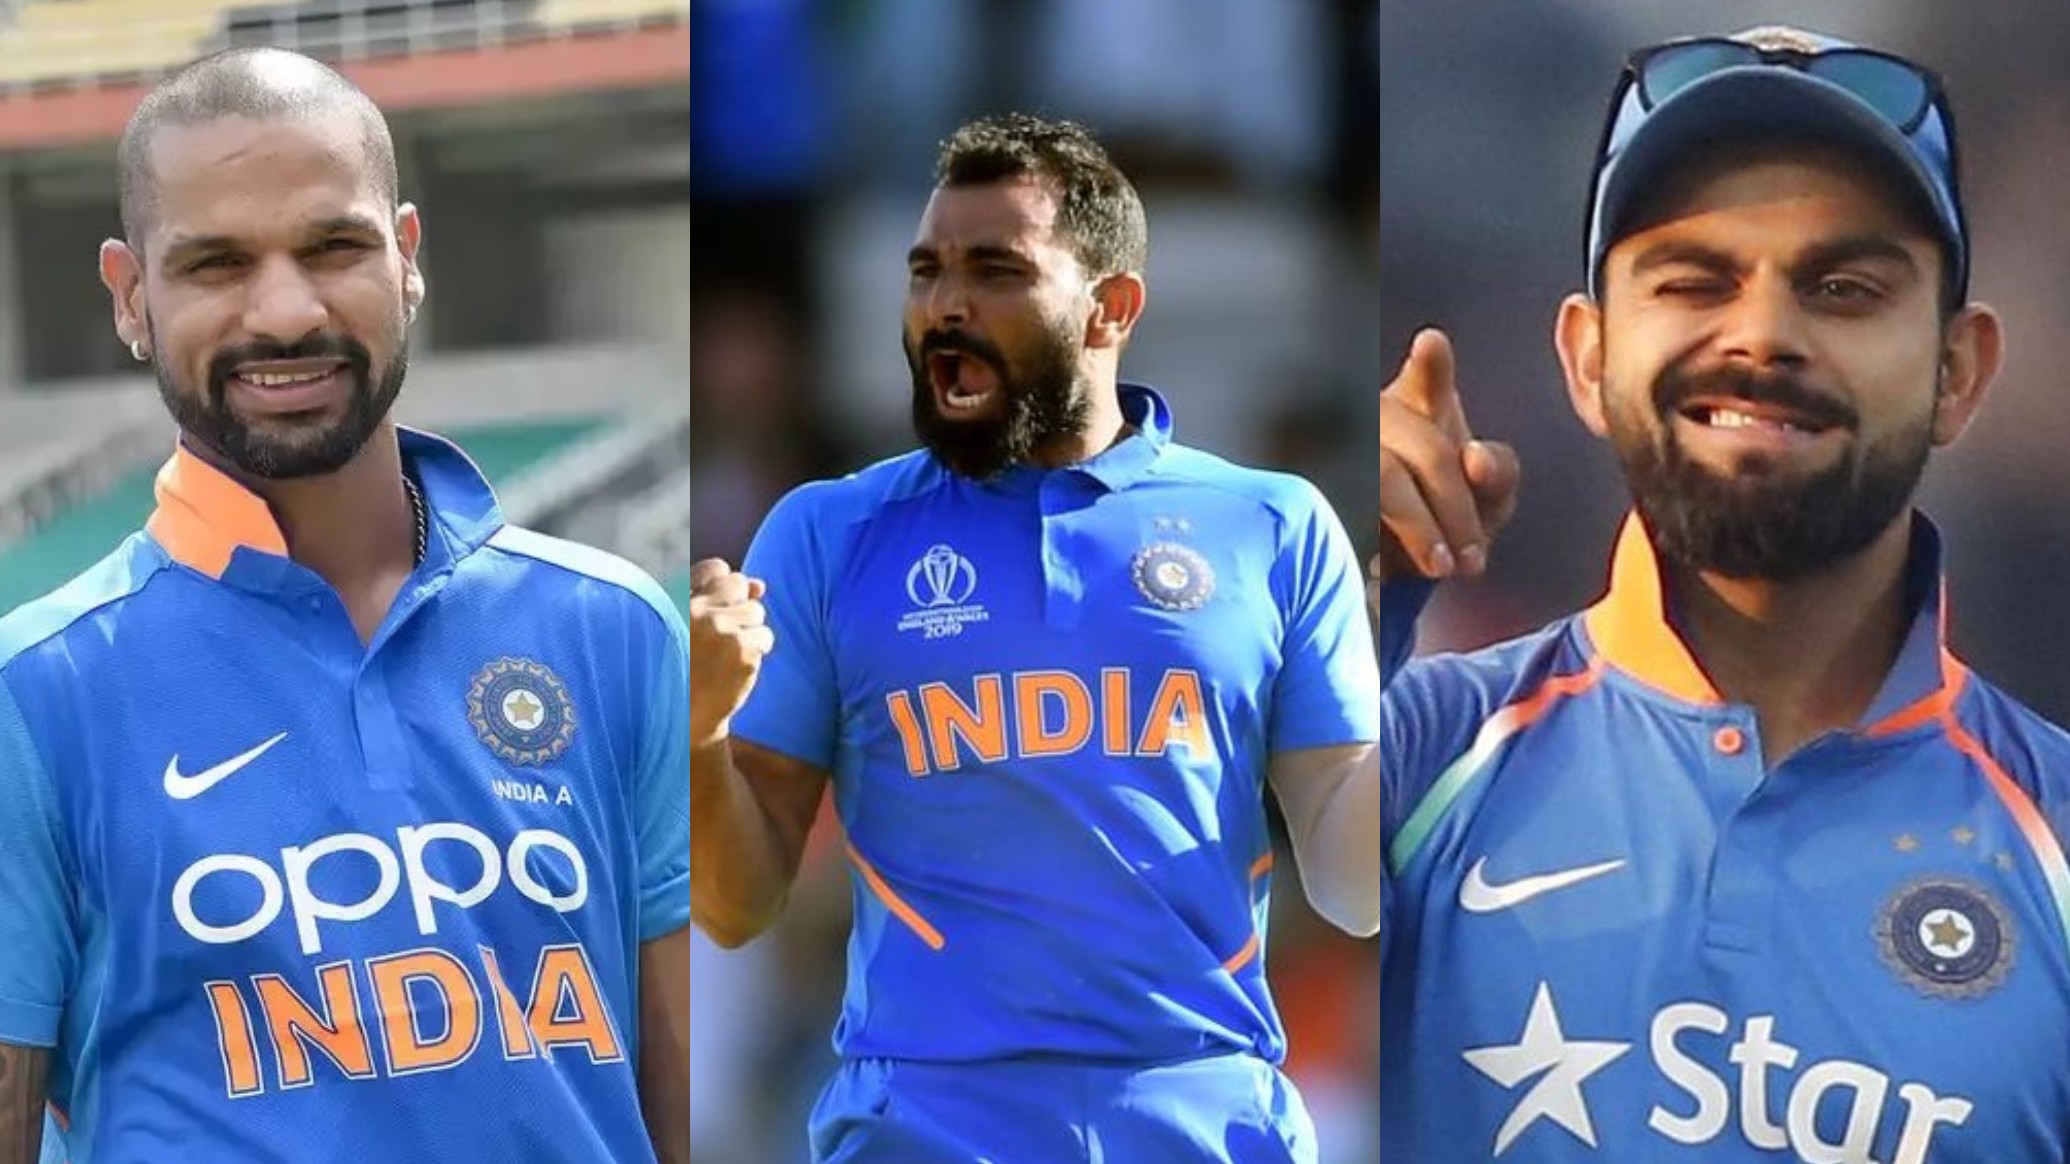 Mohammad Shami celebrates his 30th birthday; Indian cricketers sends across wishes